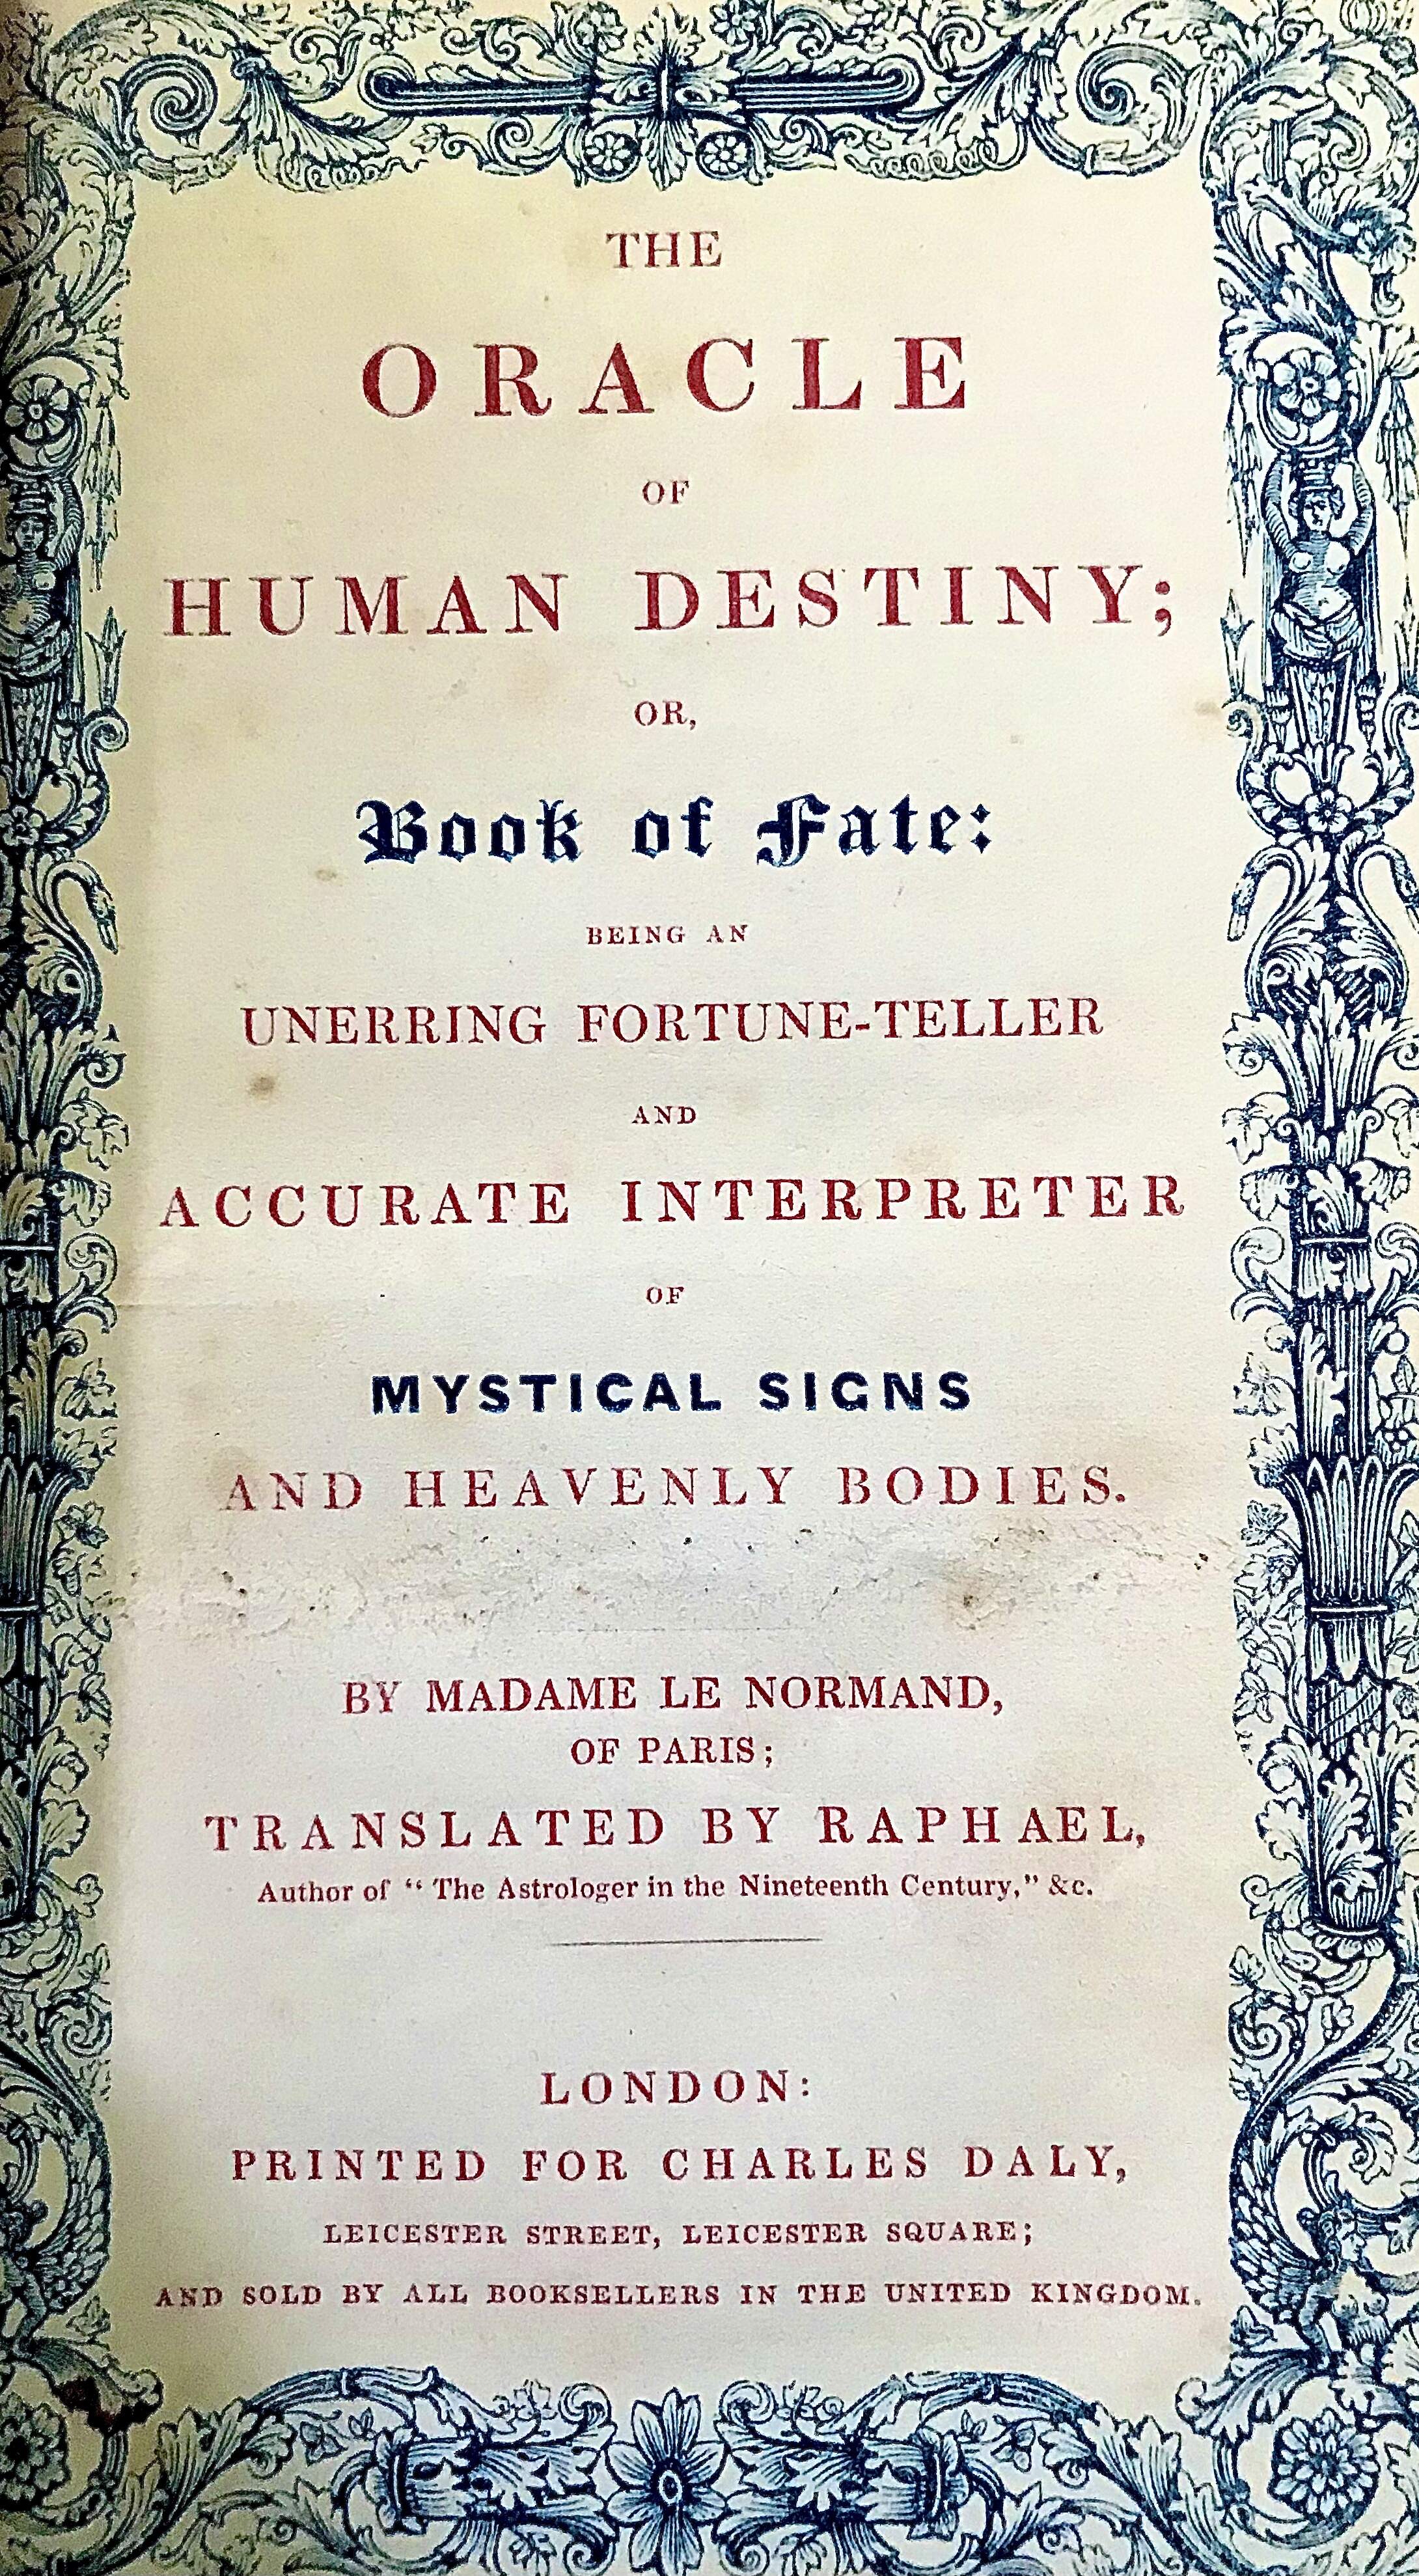 Madame Le Normand's Oracle of Human Destiny